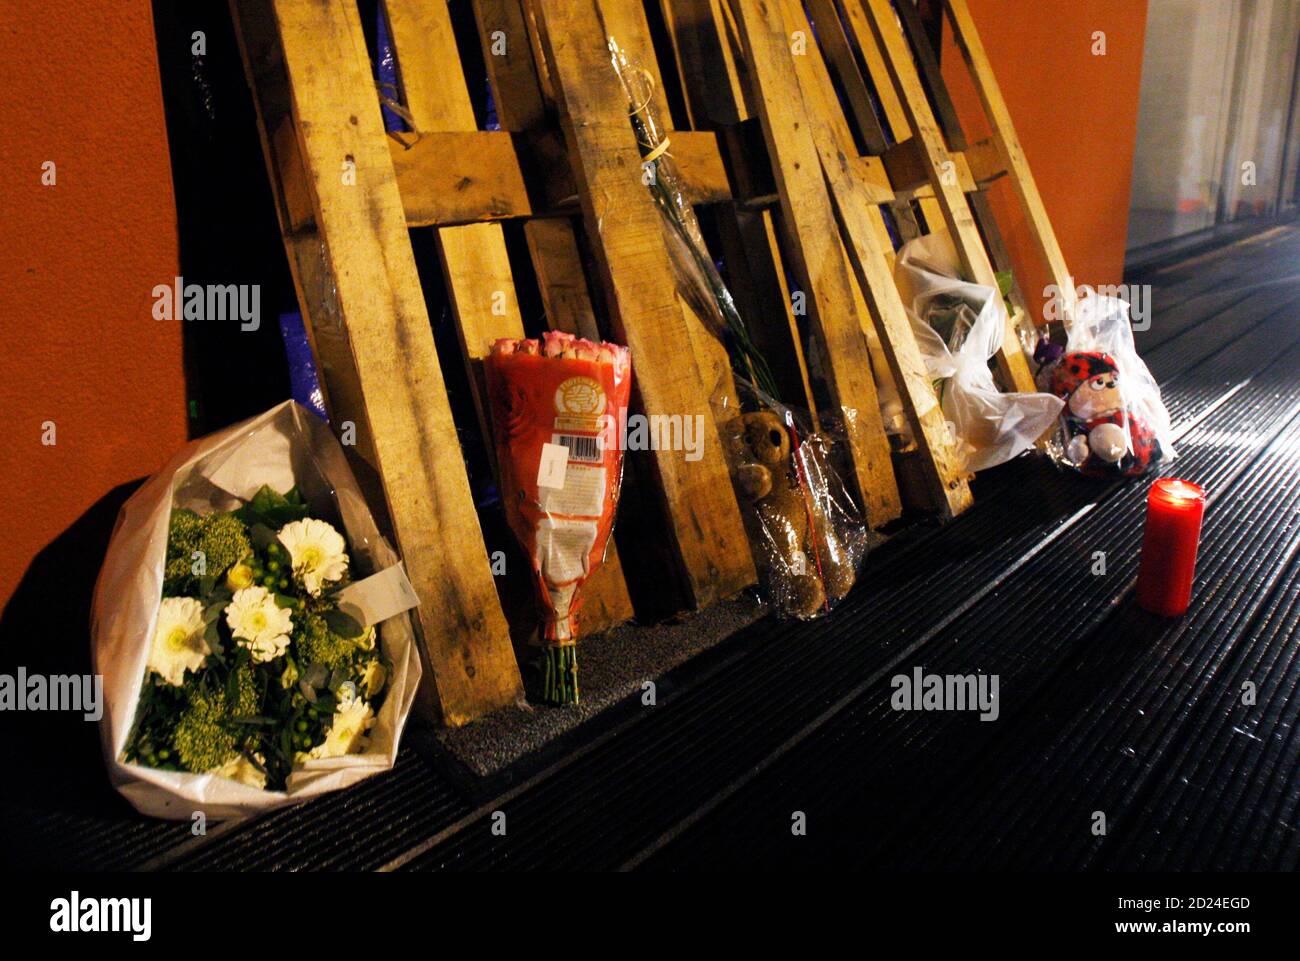 A candle and flowers are laid at the entrance of a creche in which a knife attack occurred in Dendermonde January 23, 2009. A man with a white painted face and blackened eyes stabbed to death two infants and a woman and injured 13 at a nursery in western Belgium on Friday before cycling away.      REUTERS/Francois Lenoir (BELGIUM) Stock Photo